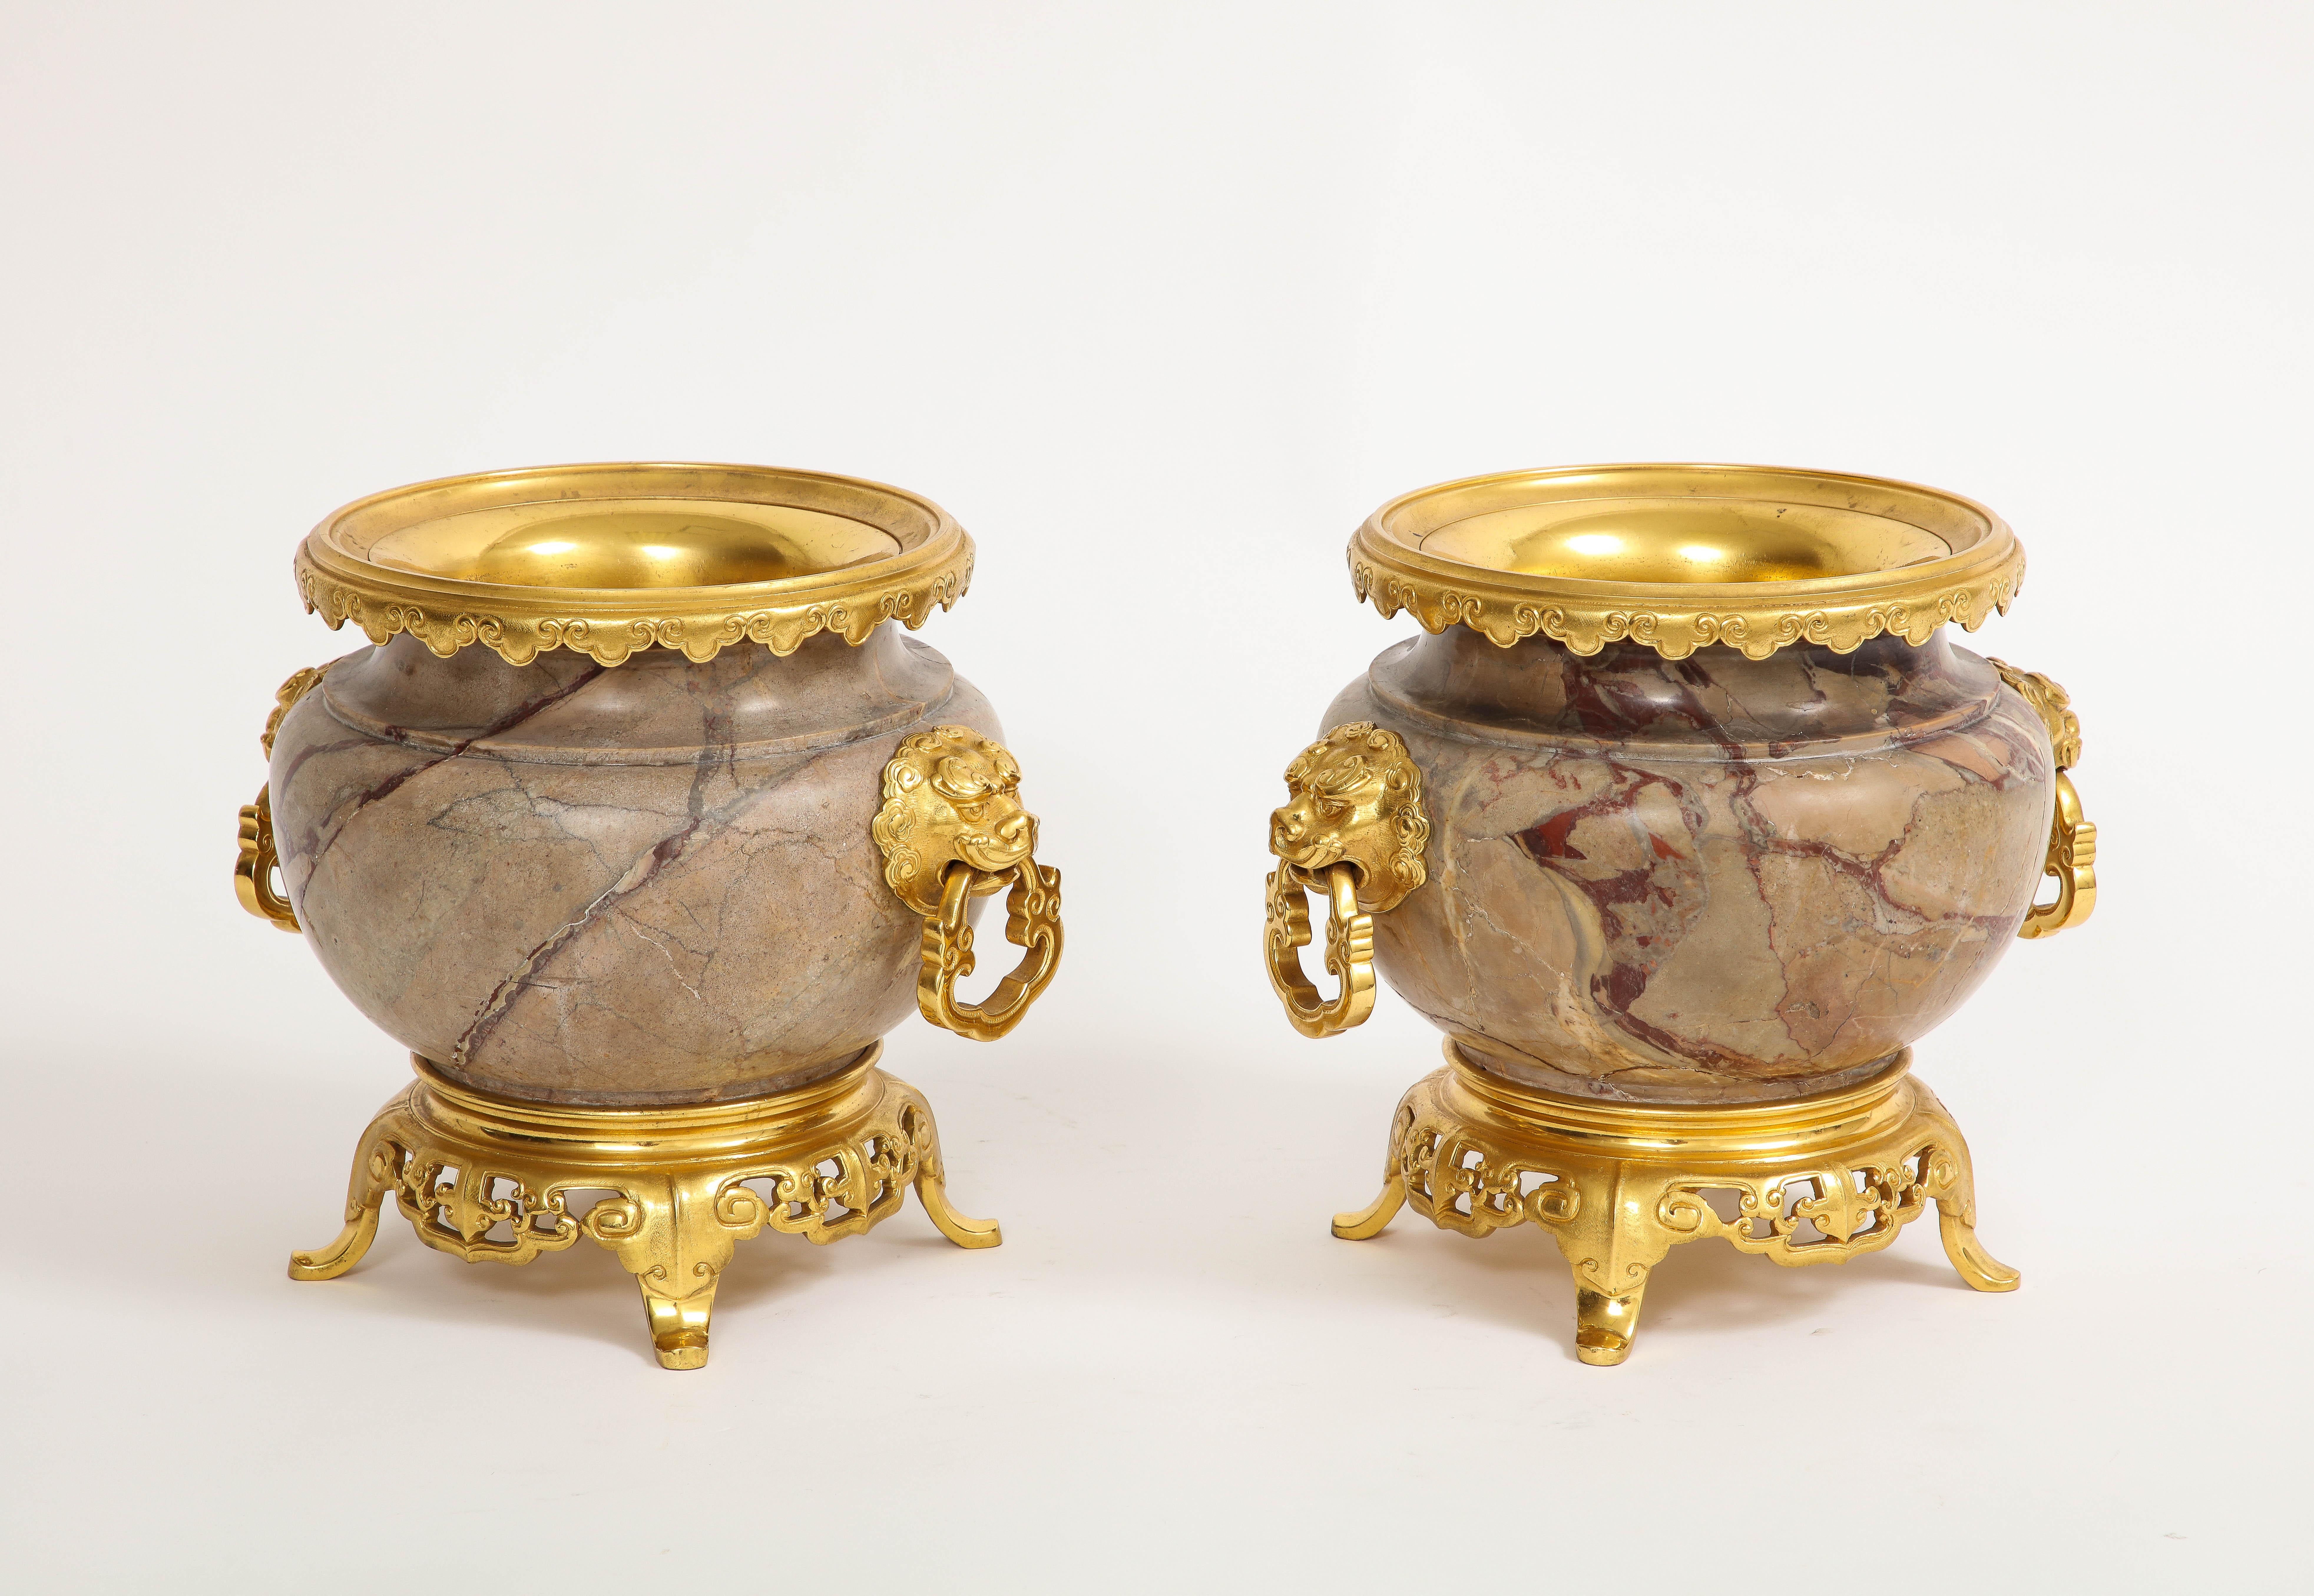 Hand-Carved Pair of 19th Century French Ormolu Mounted Marble Centerpieces, H. Journet & Cie For Sale